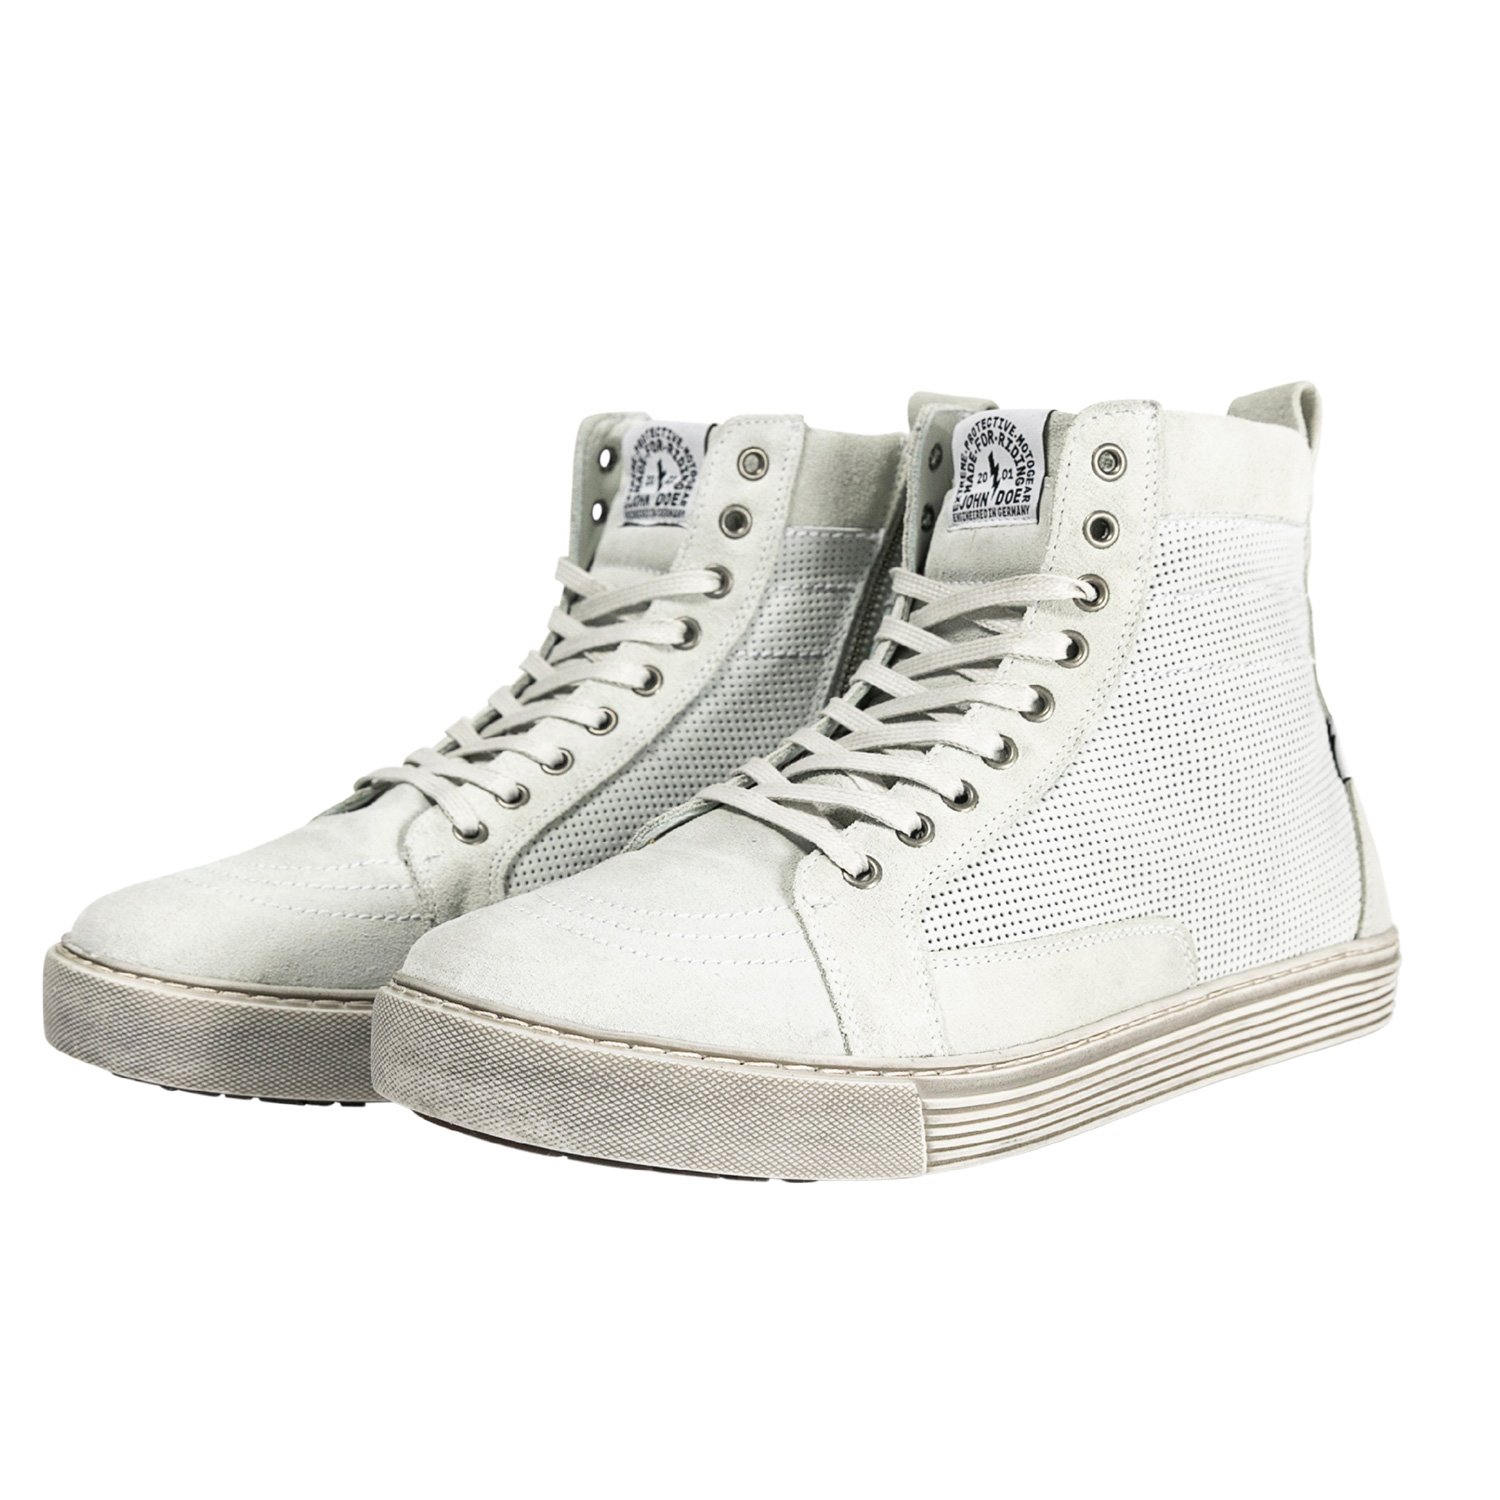 Image of John Doe Neo Blanc Chaussures Taille 39